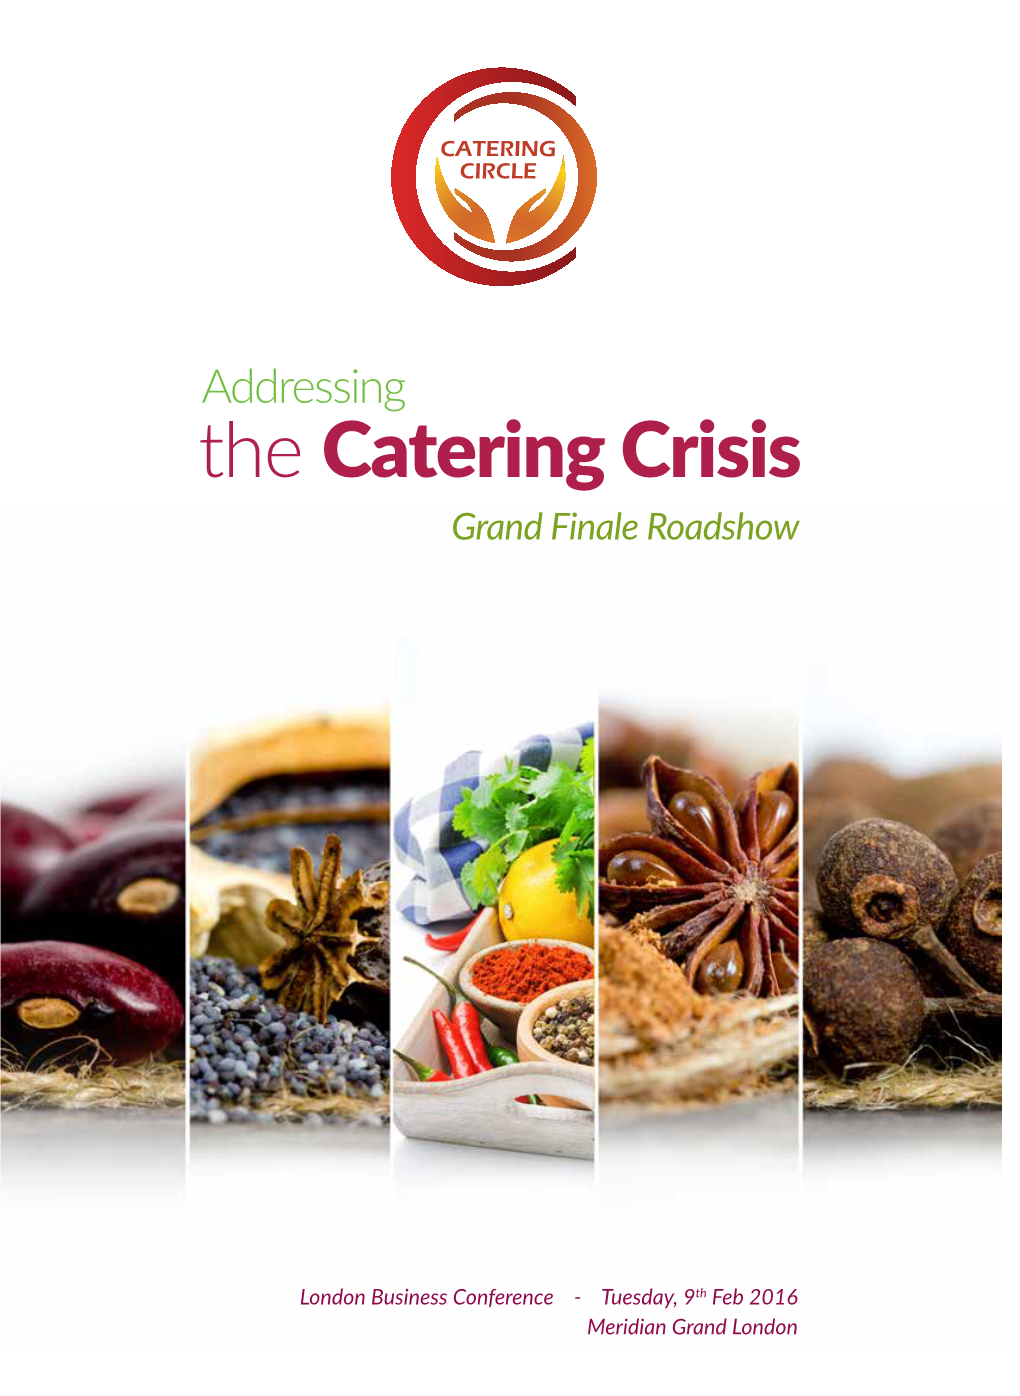 The Catering Crisis Grand Finale Roadshow